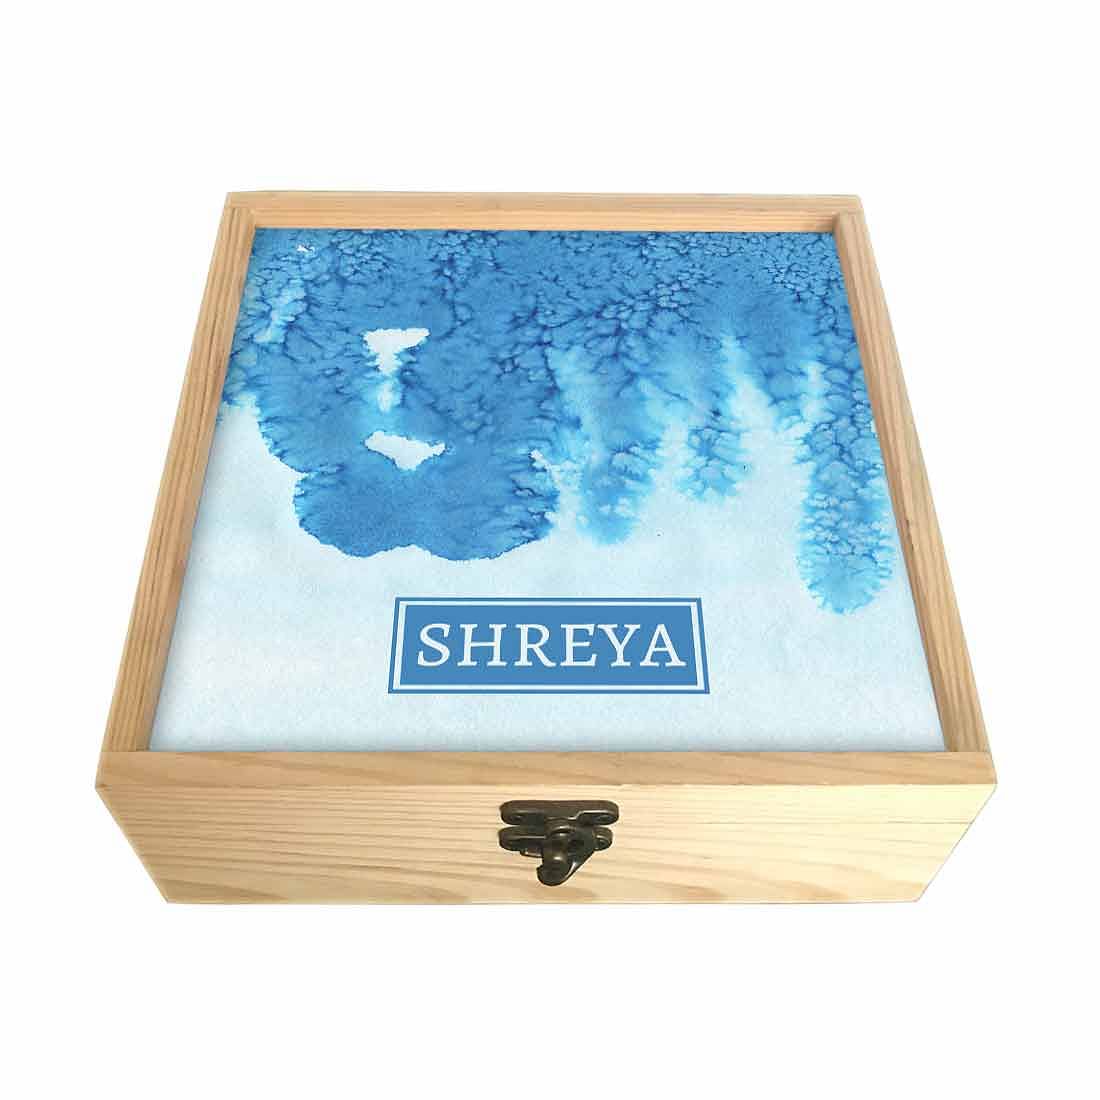 Wooden Jewellery Box for Women - Arctic Space Blue Watercolor Nutcase